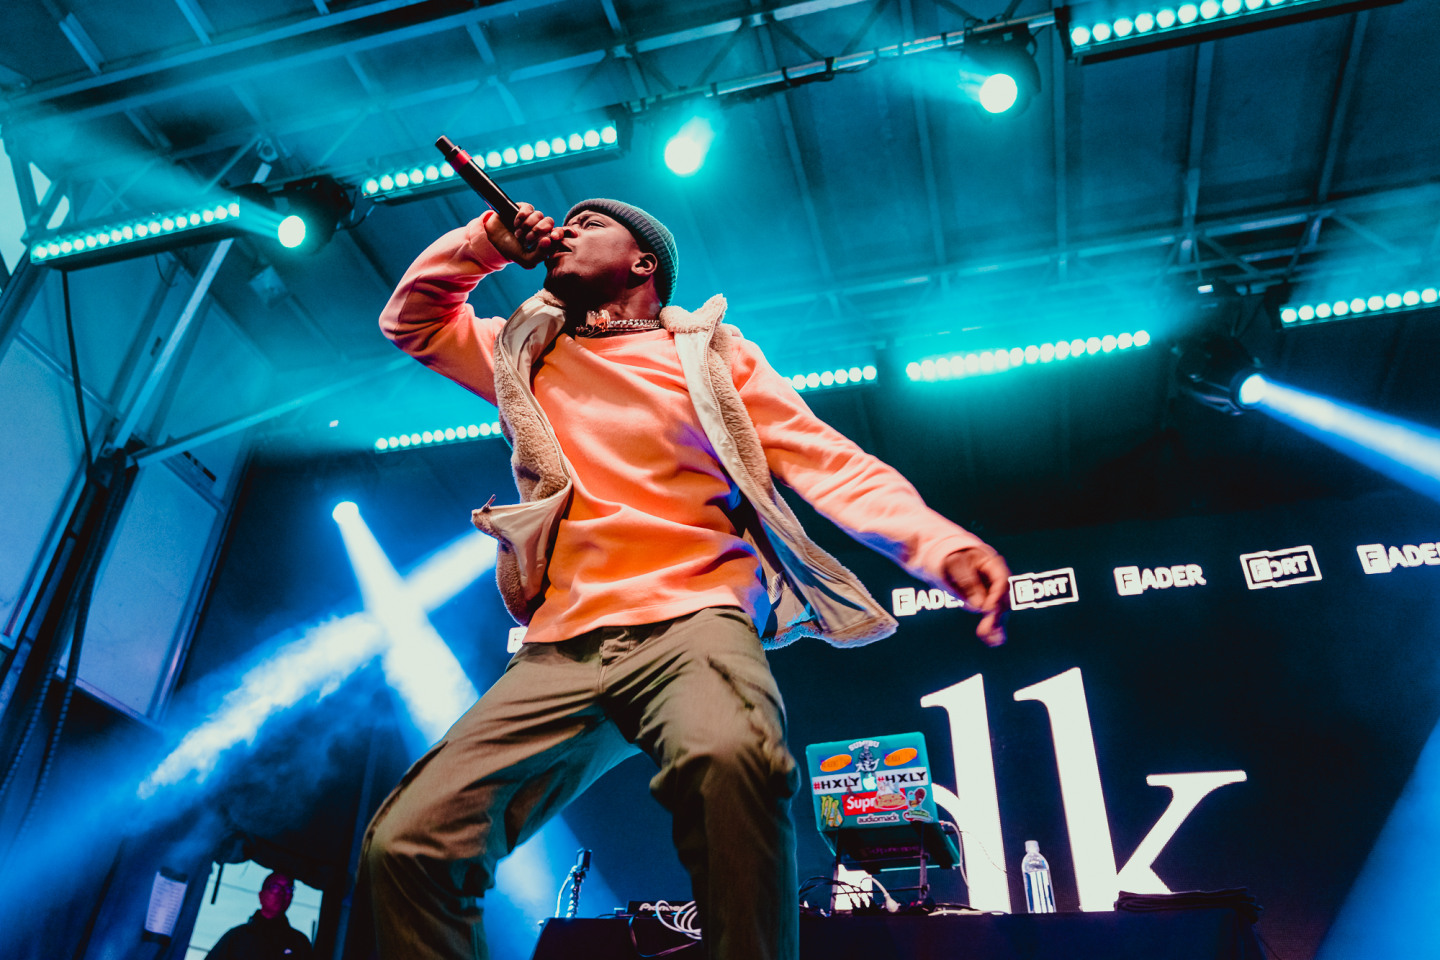 32 perfect photos from Day 3 of FADER FORT 2019